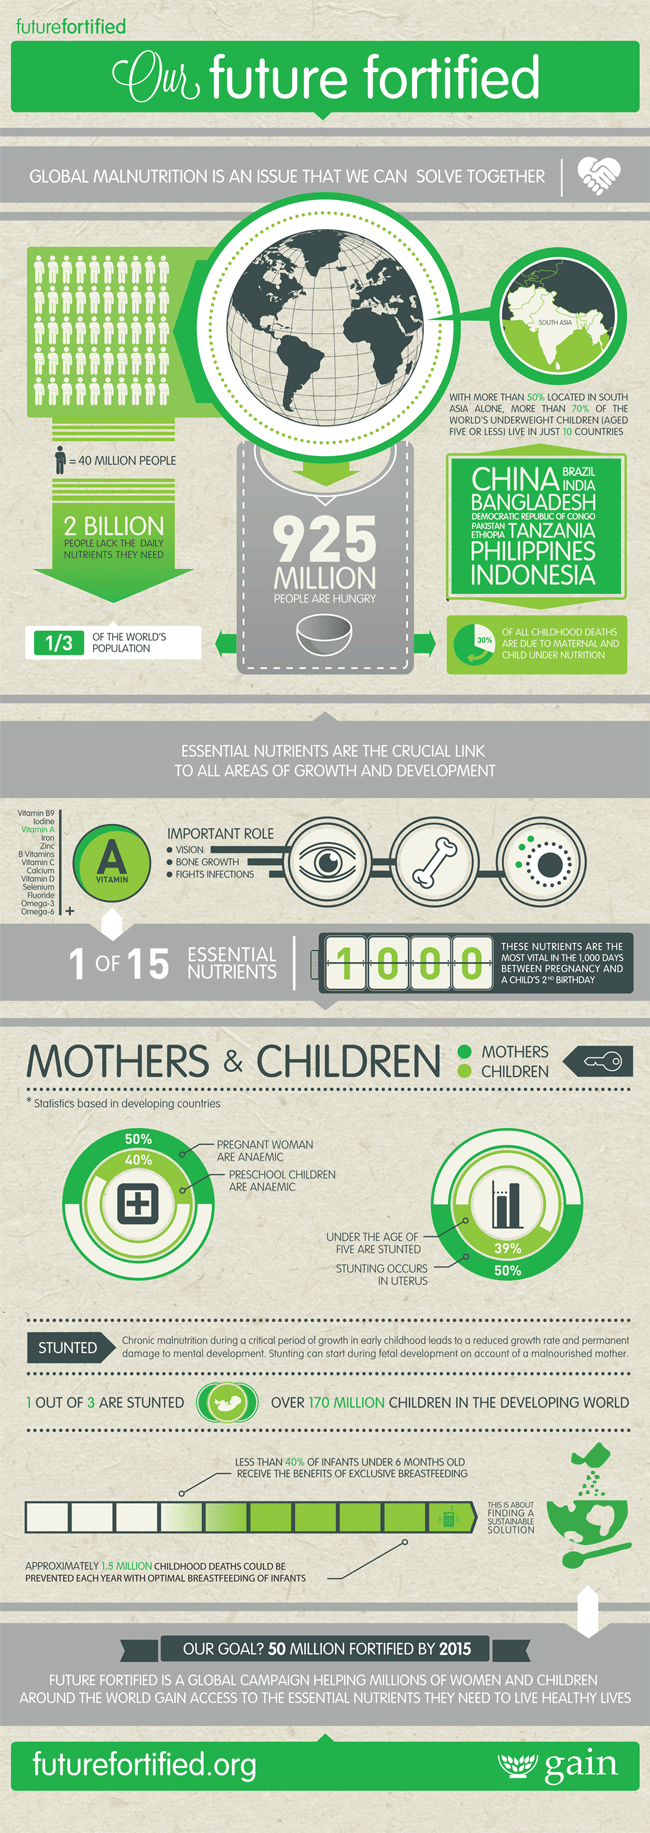 global malnutrition infographic